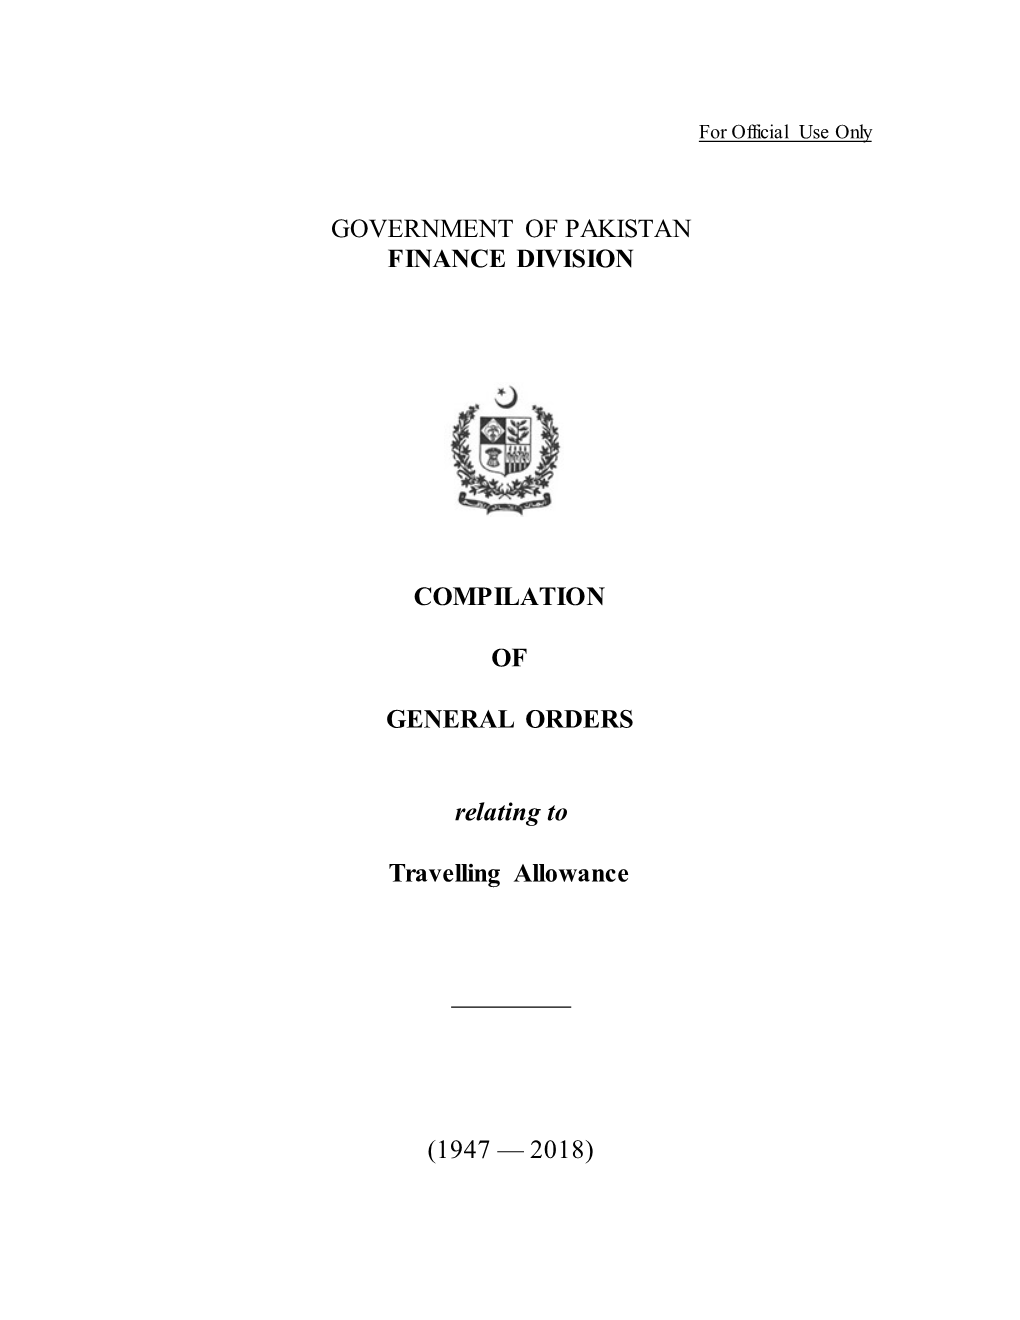 GOVERNMENT of PAKISTAN FINANCE DIVISION COMPILATION of GENERAL ORDERS Relating to Travelling Allowance (1947 — 2018)